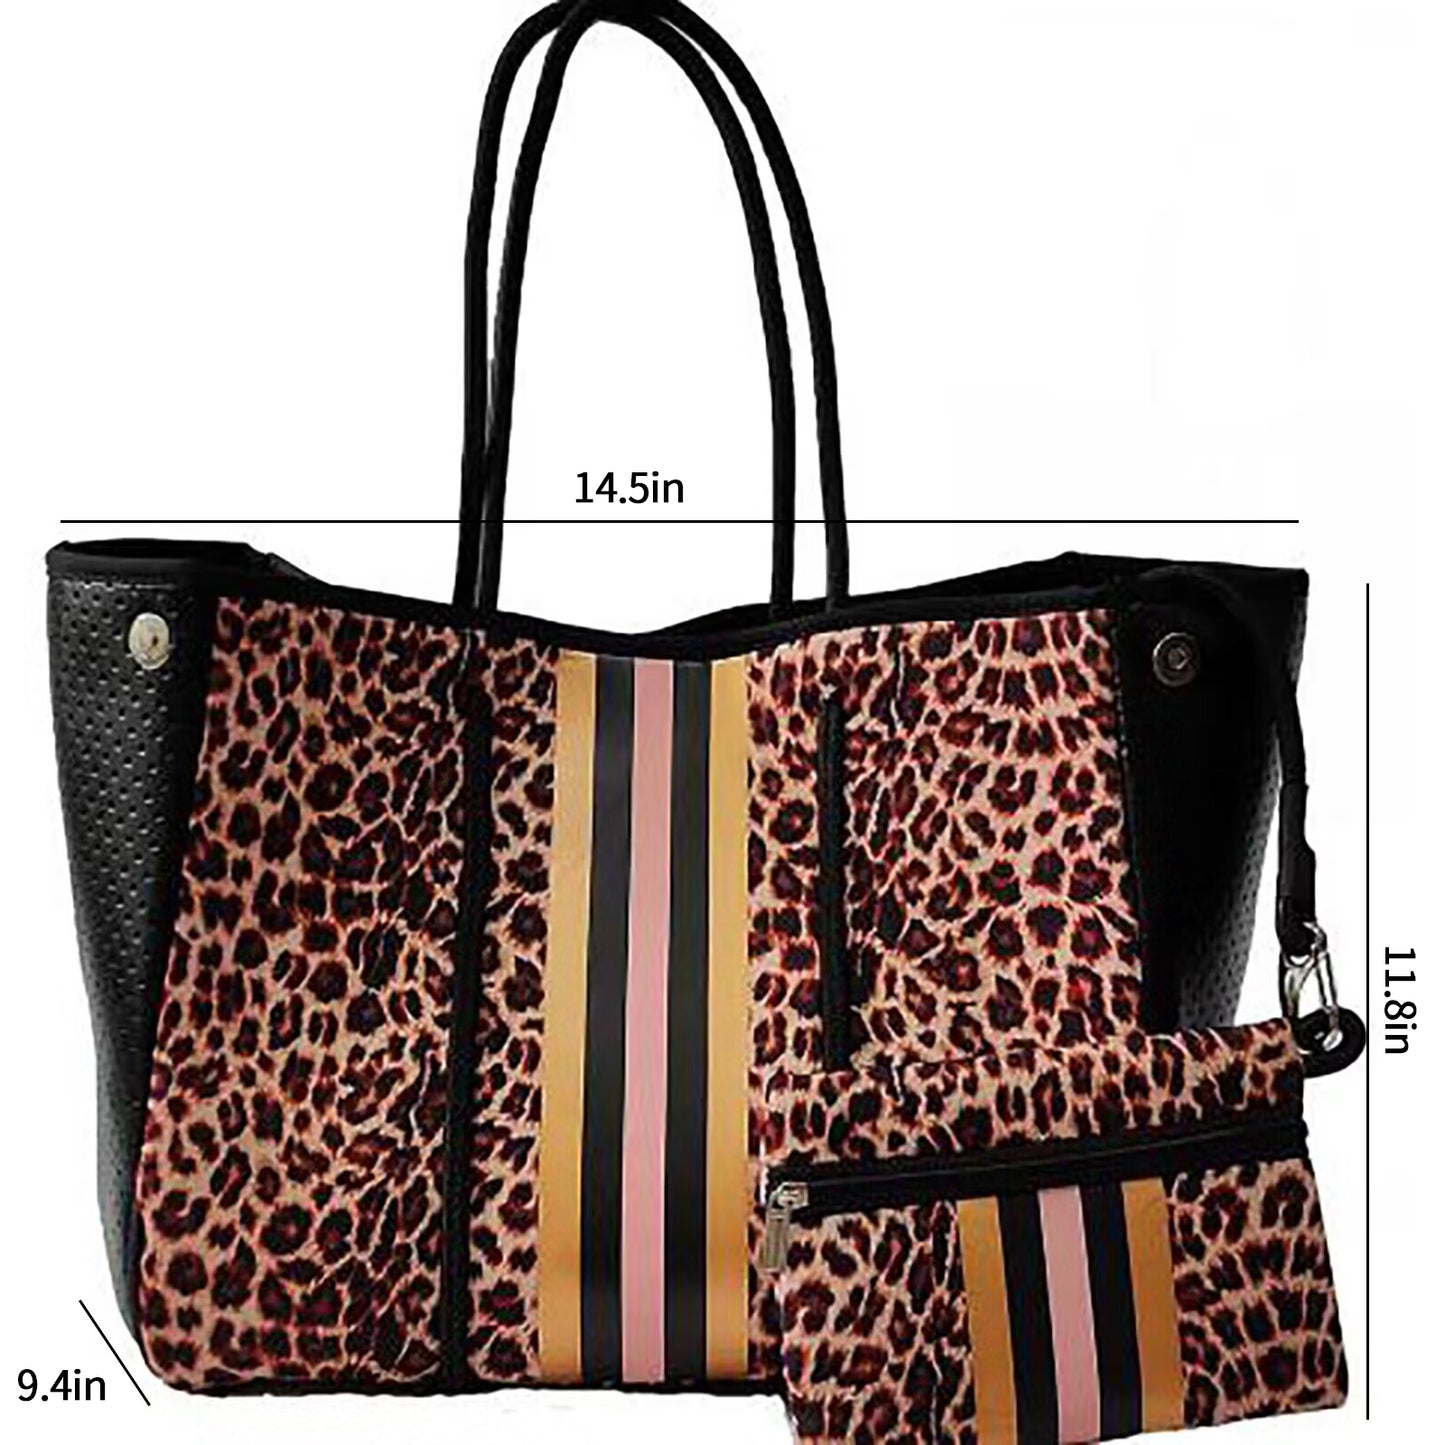 10Pcs Oversized Leopard Waterproof Pouch Clutch Neoprene Beach Tote Bag For Travel Holiday